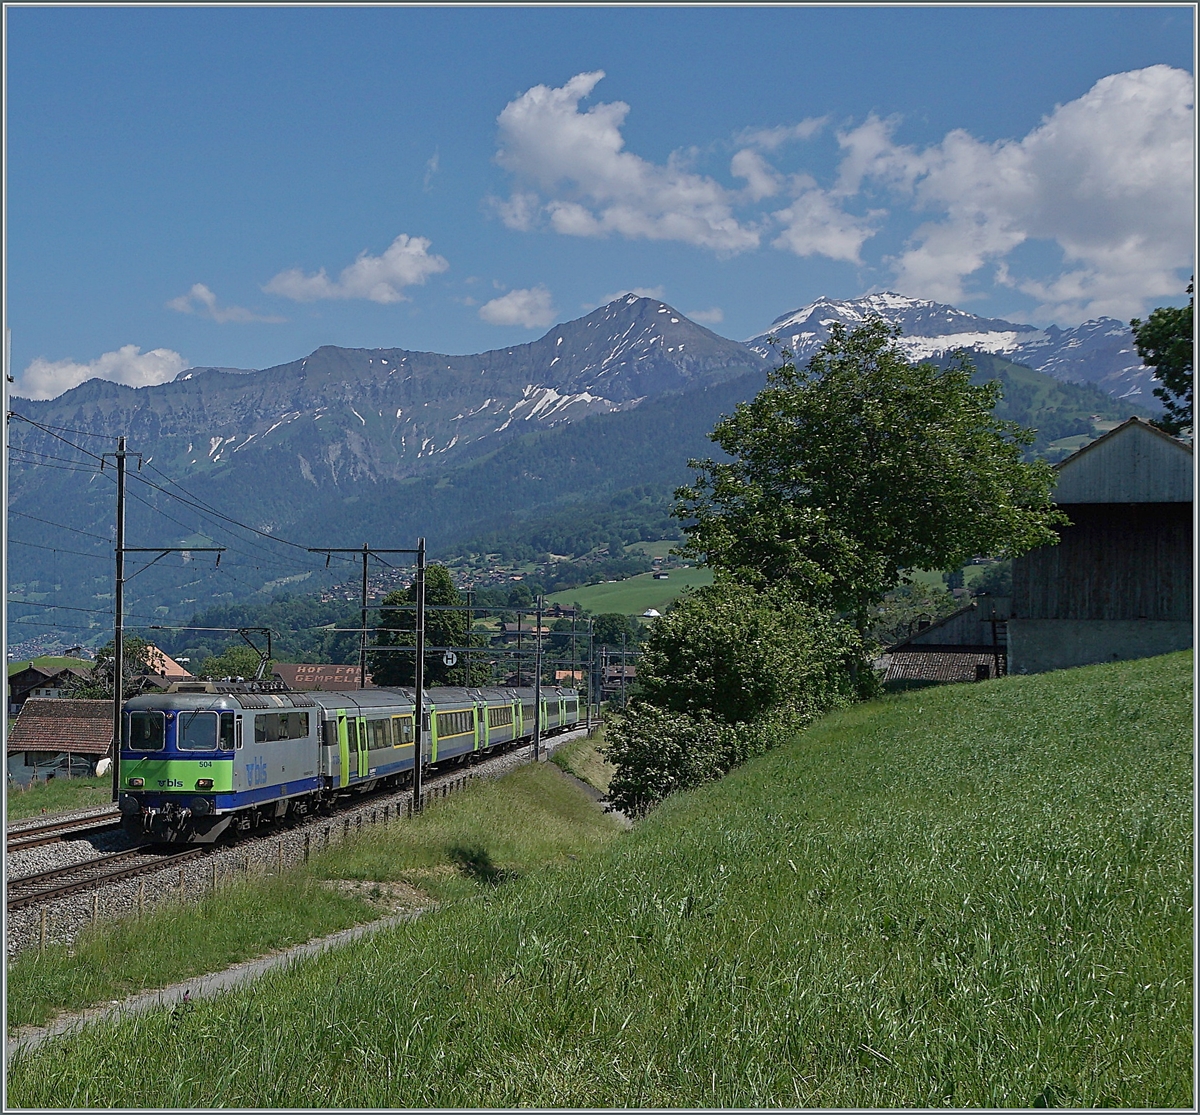 The BLS Re 4/4 II 504 with his RE from Interlaken to Zweisimmen between Faulensee and Spiez.

14.06.2021